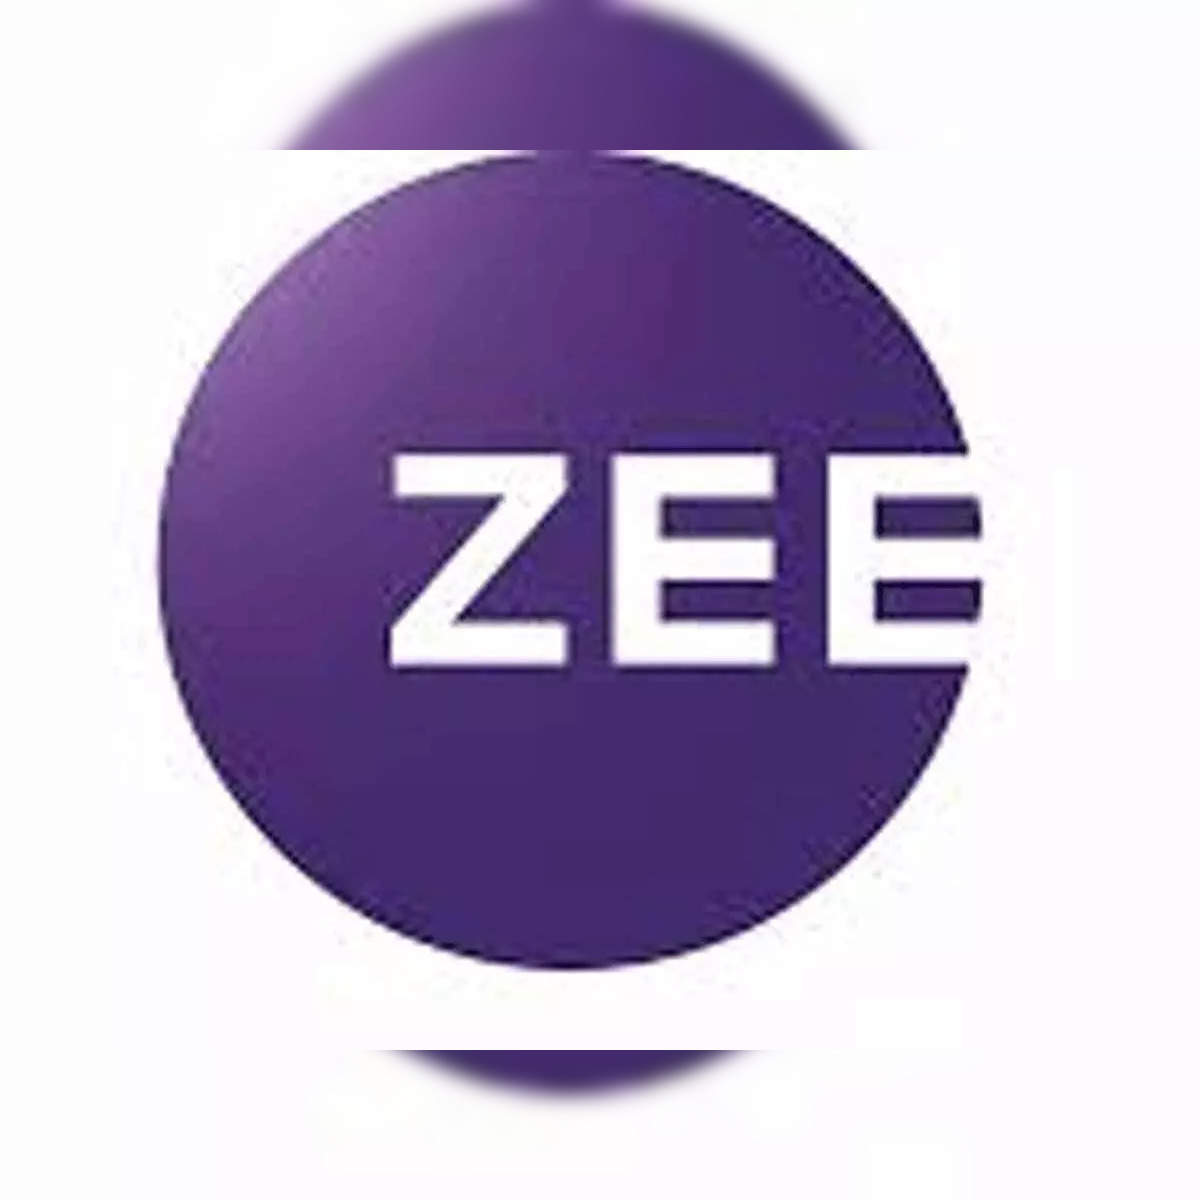 Axis Bank moves NCLT to seek insolvency proceedings against Zee Learn